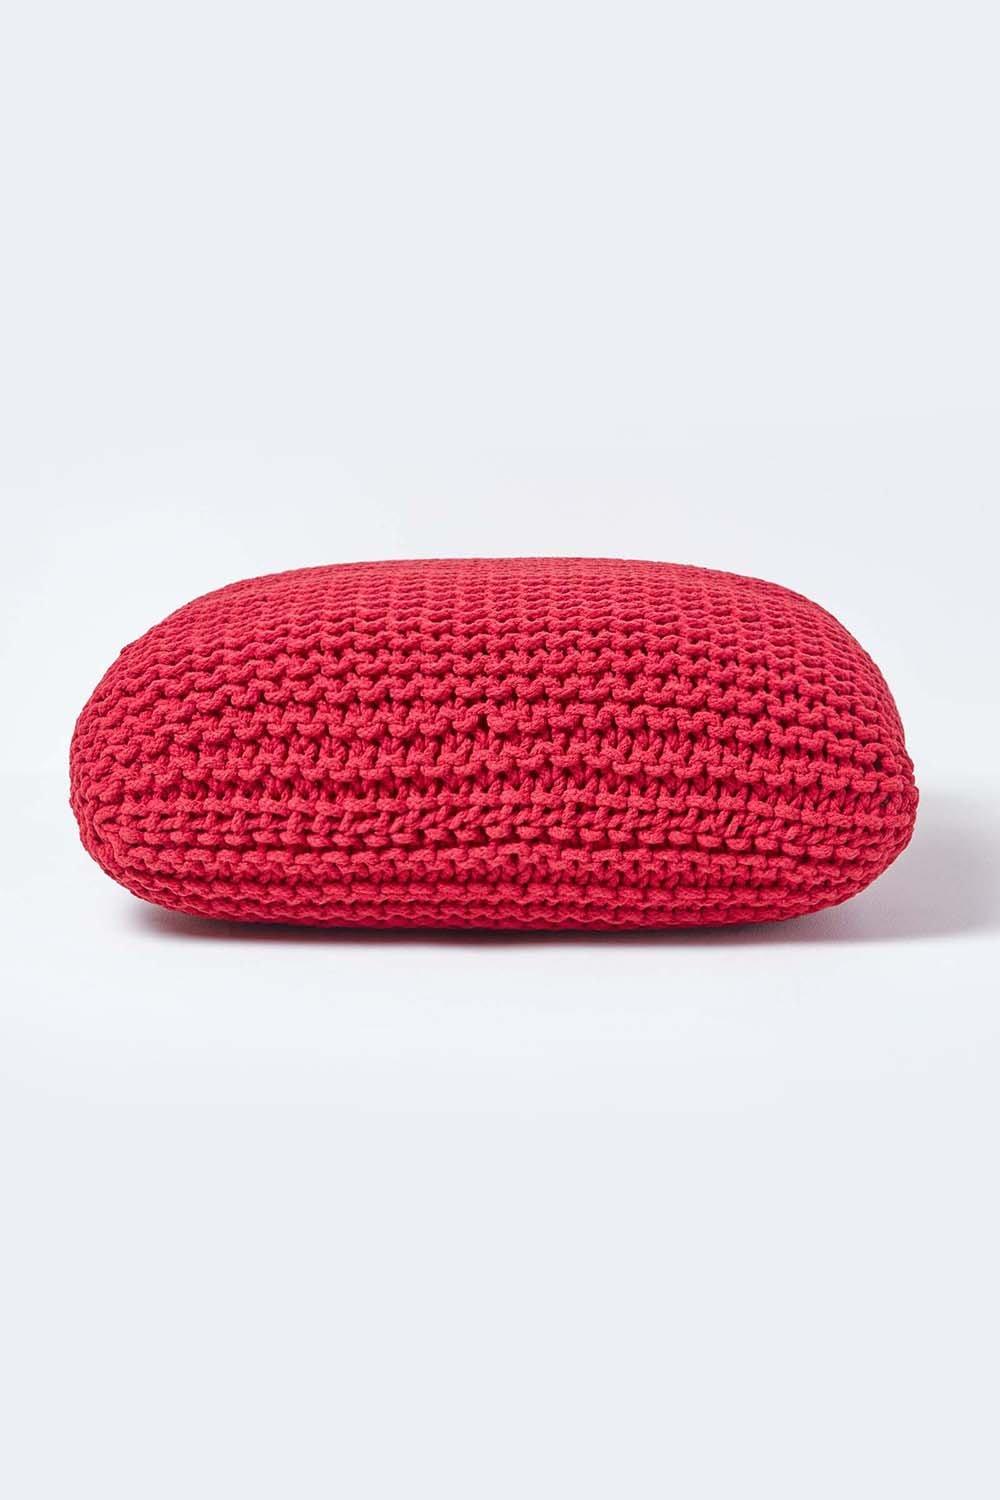 Homescapes Square Cotton Knitted Pouffe Floor Cushion|red